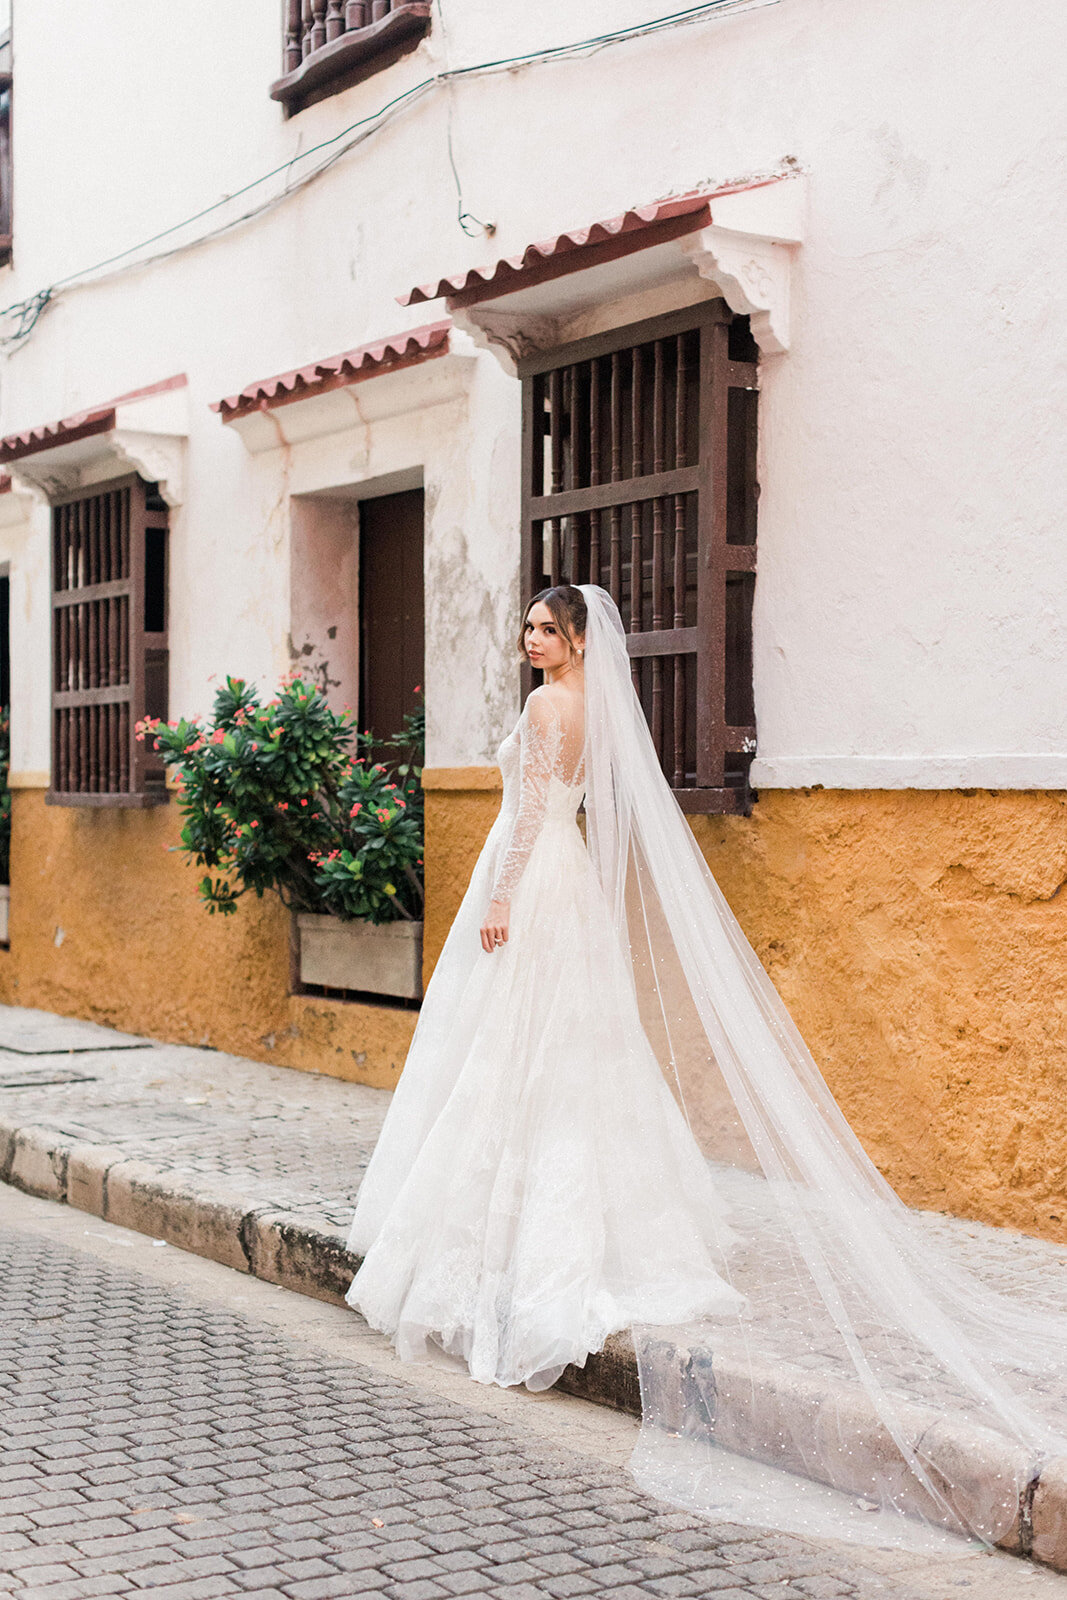 Watters Wedaways Sofitel Cartagena Colombia-Valorie Darling Photography-DF1A1084